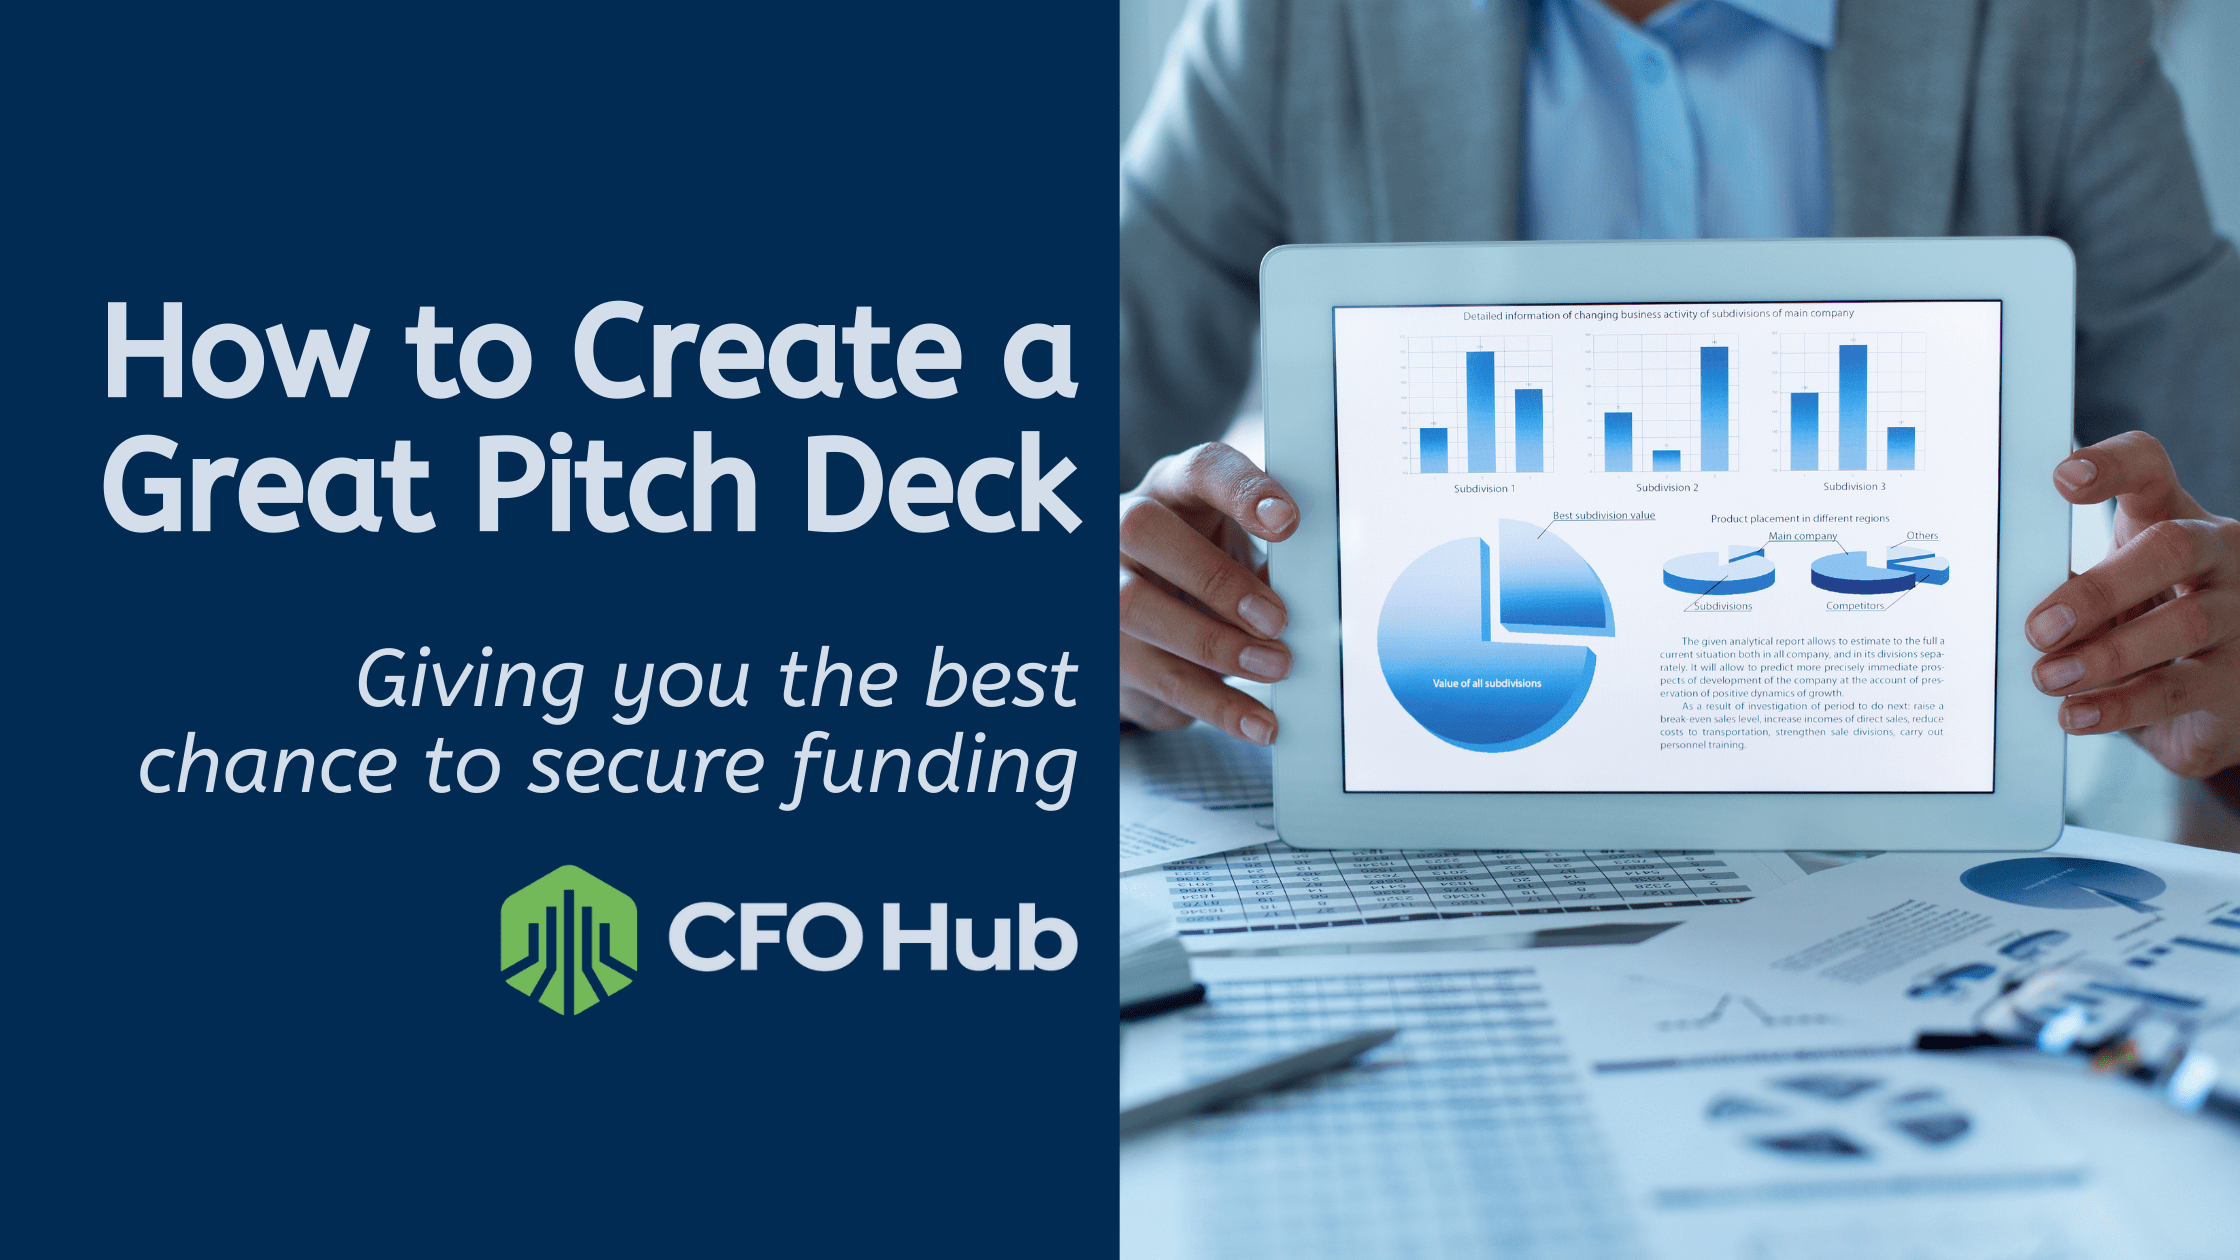 How to create a great pitch deck that will secure funding